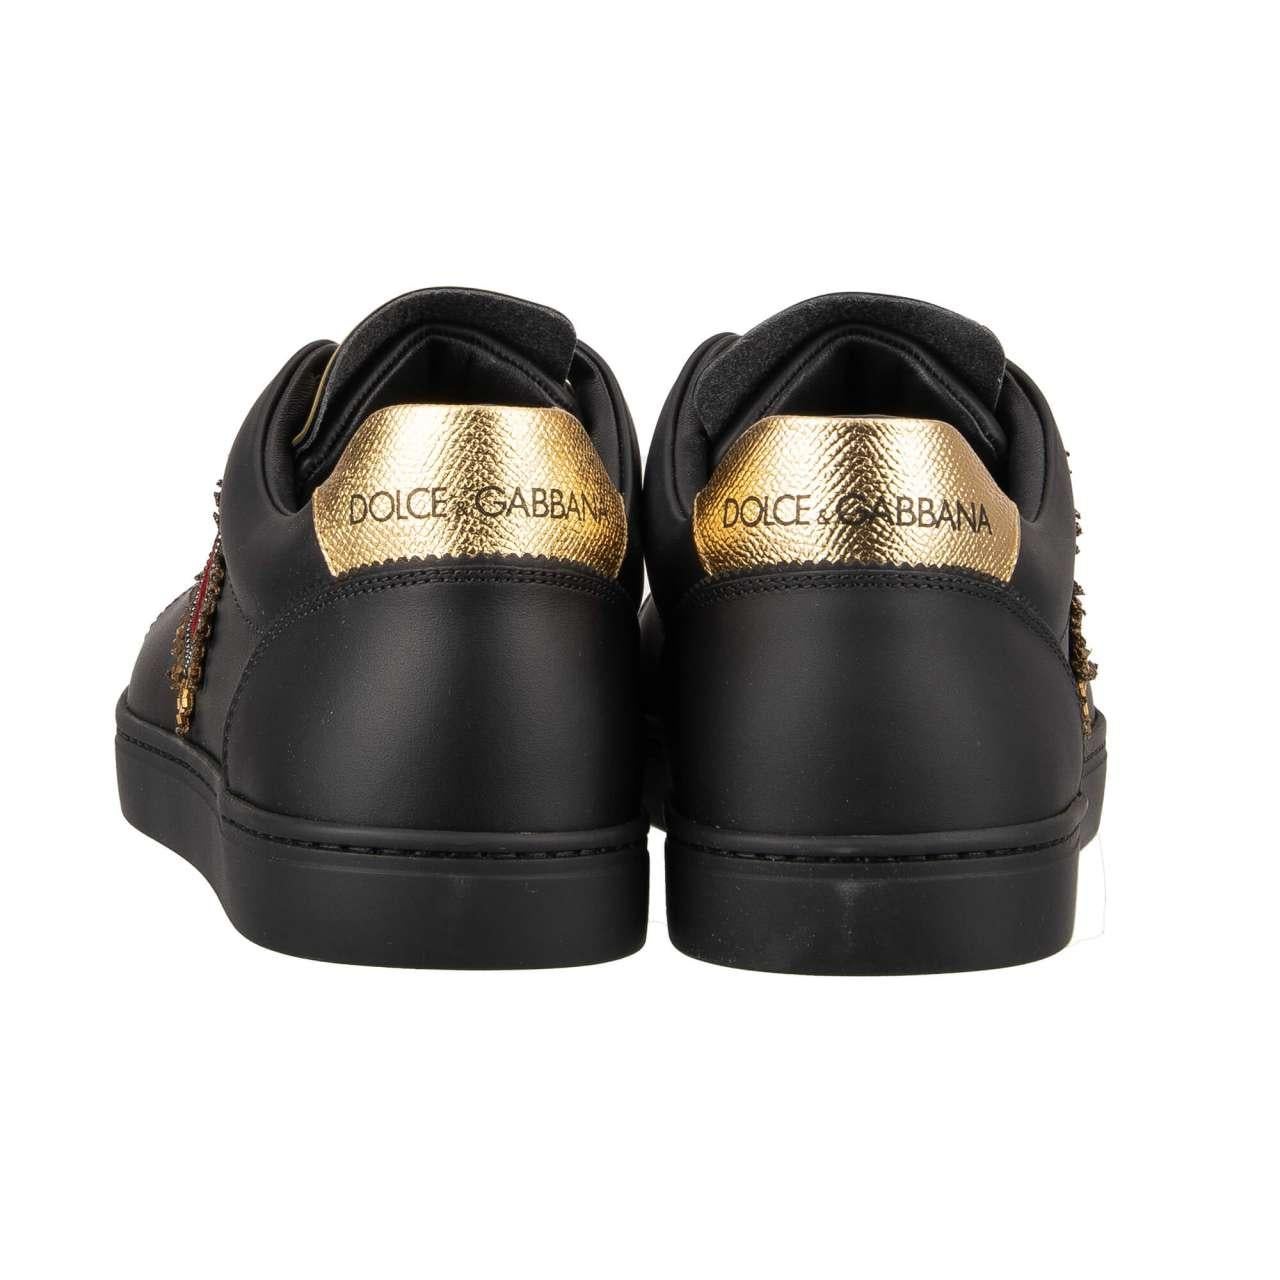 D&G - Low-Top Sneaker LONDON with Logo Heart Embroidery Black Gold EUR 41.5 For Sale 1